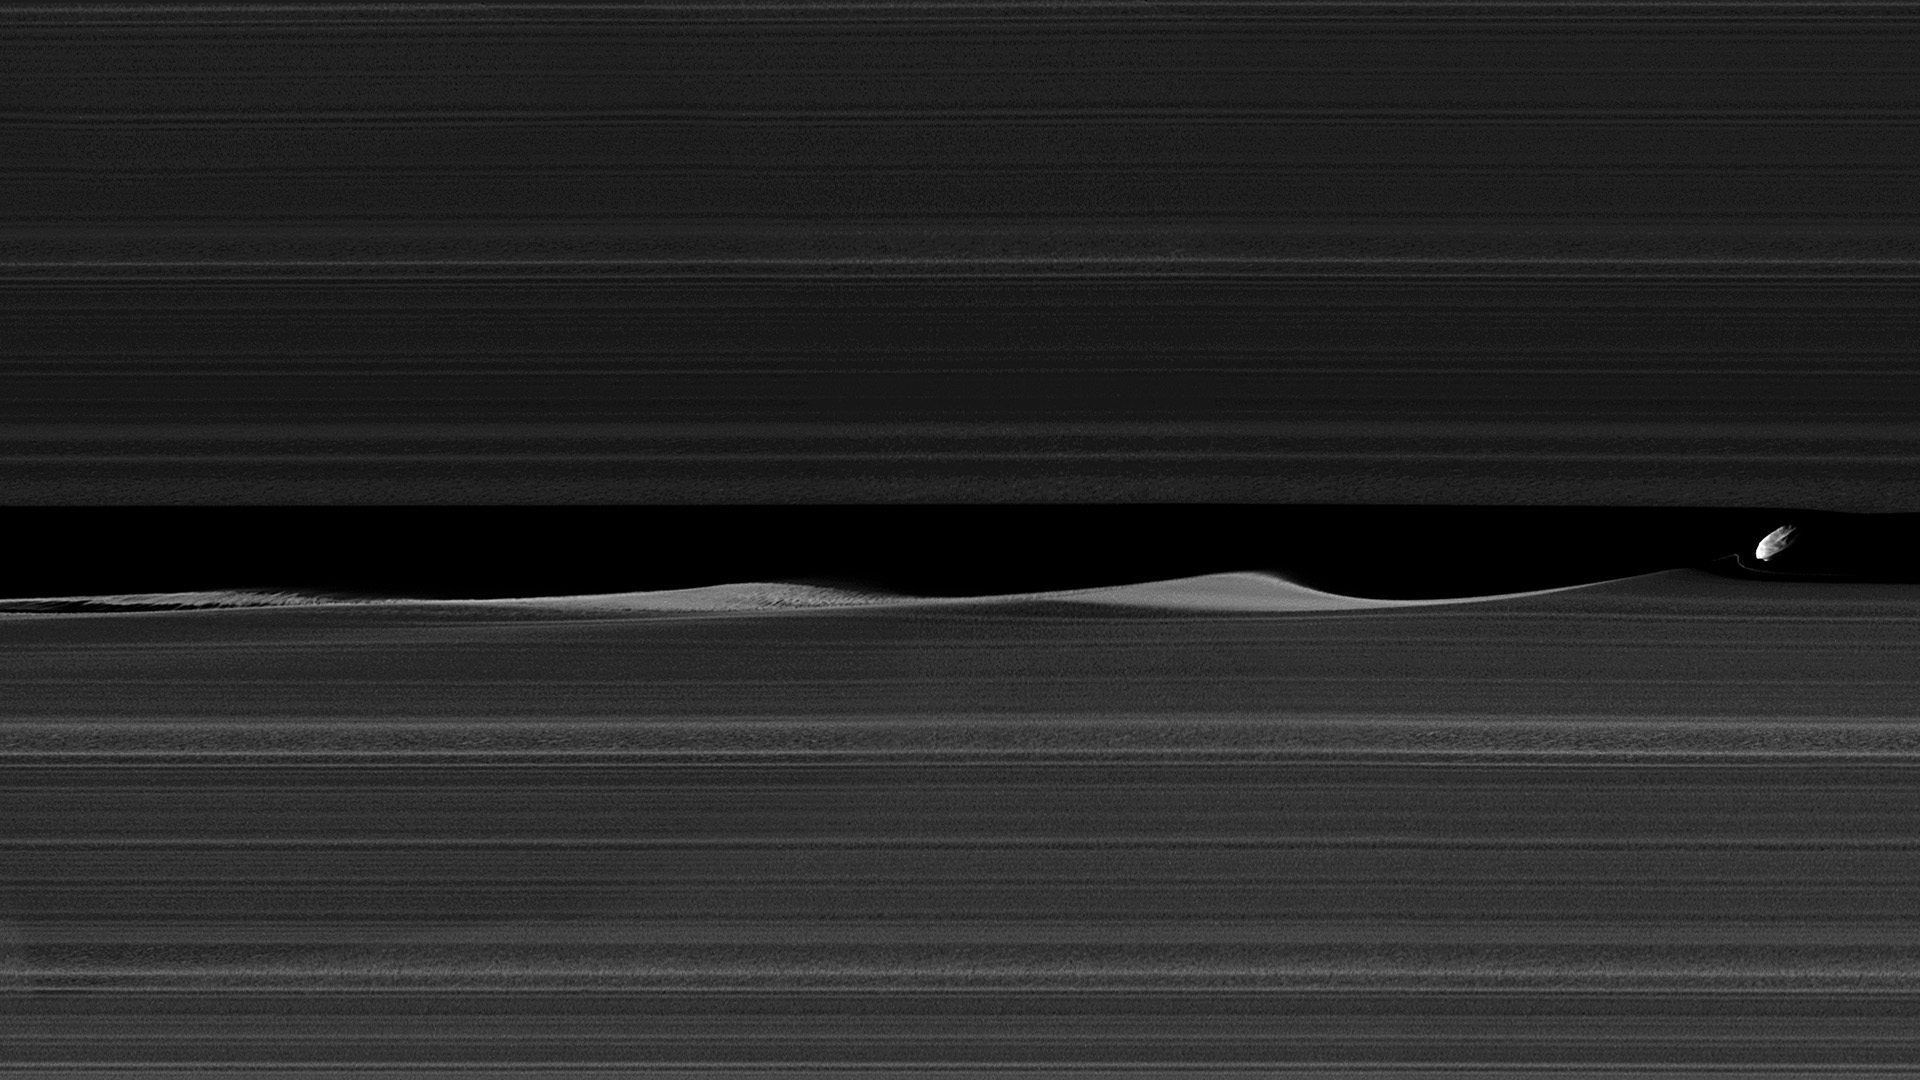 Daphnis, one of Saturn's ring-embedded moons